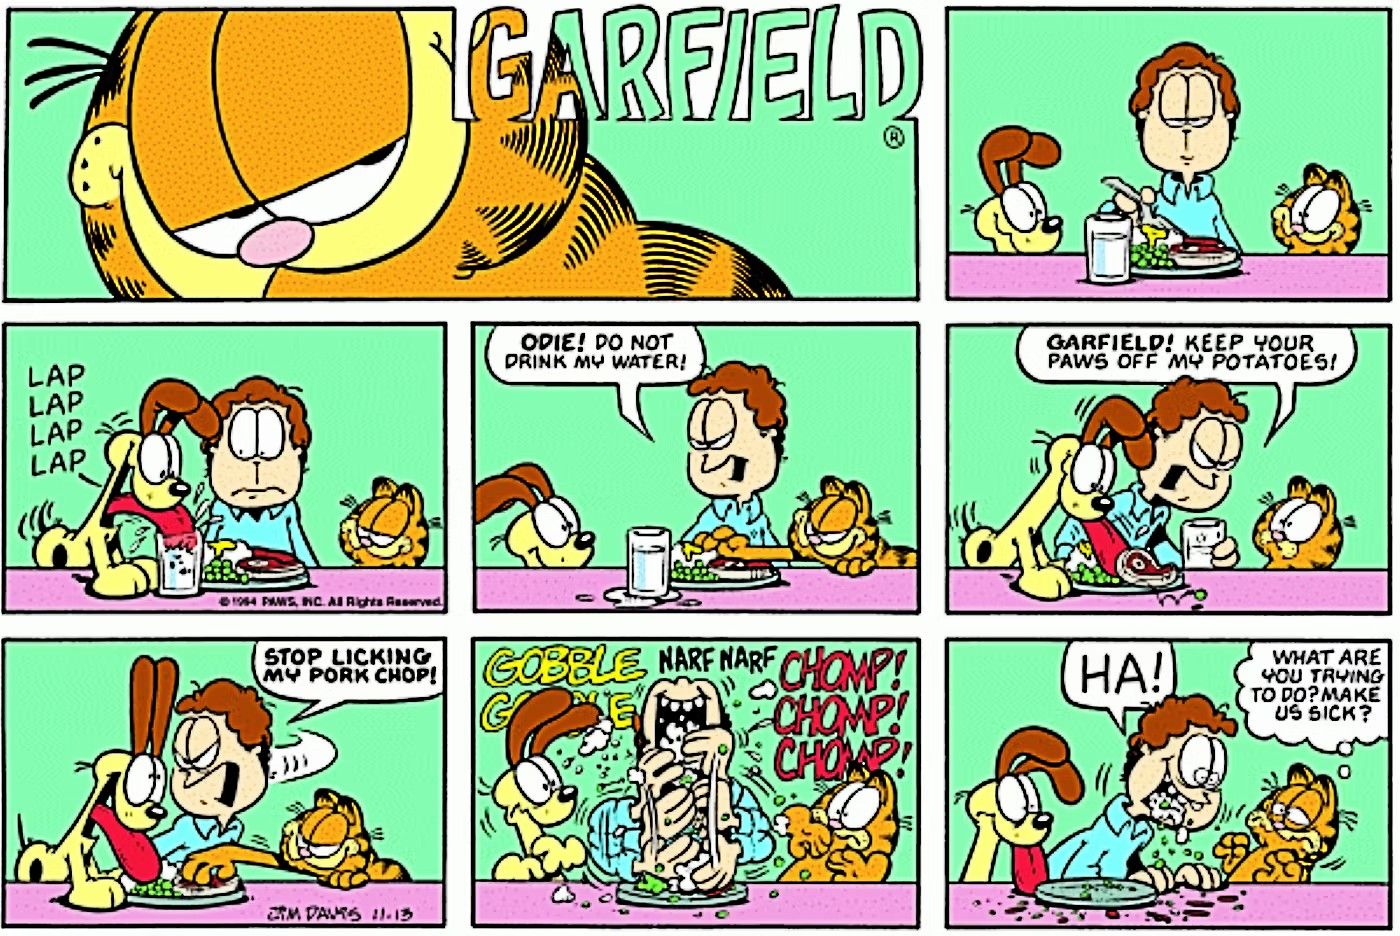 Jon Arbuckle stoops to his pets level to avoid giving them his human food